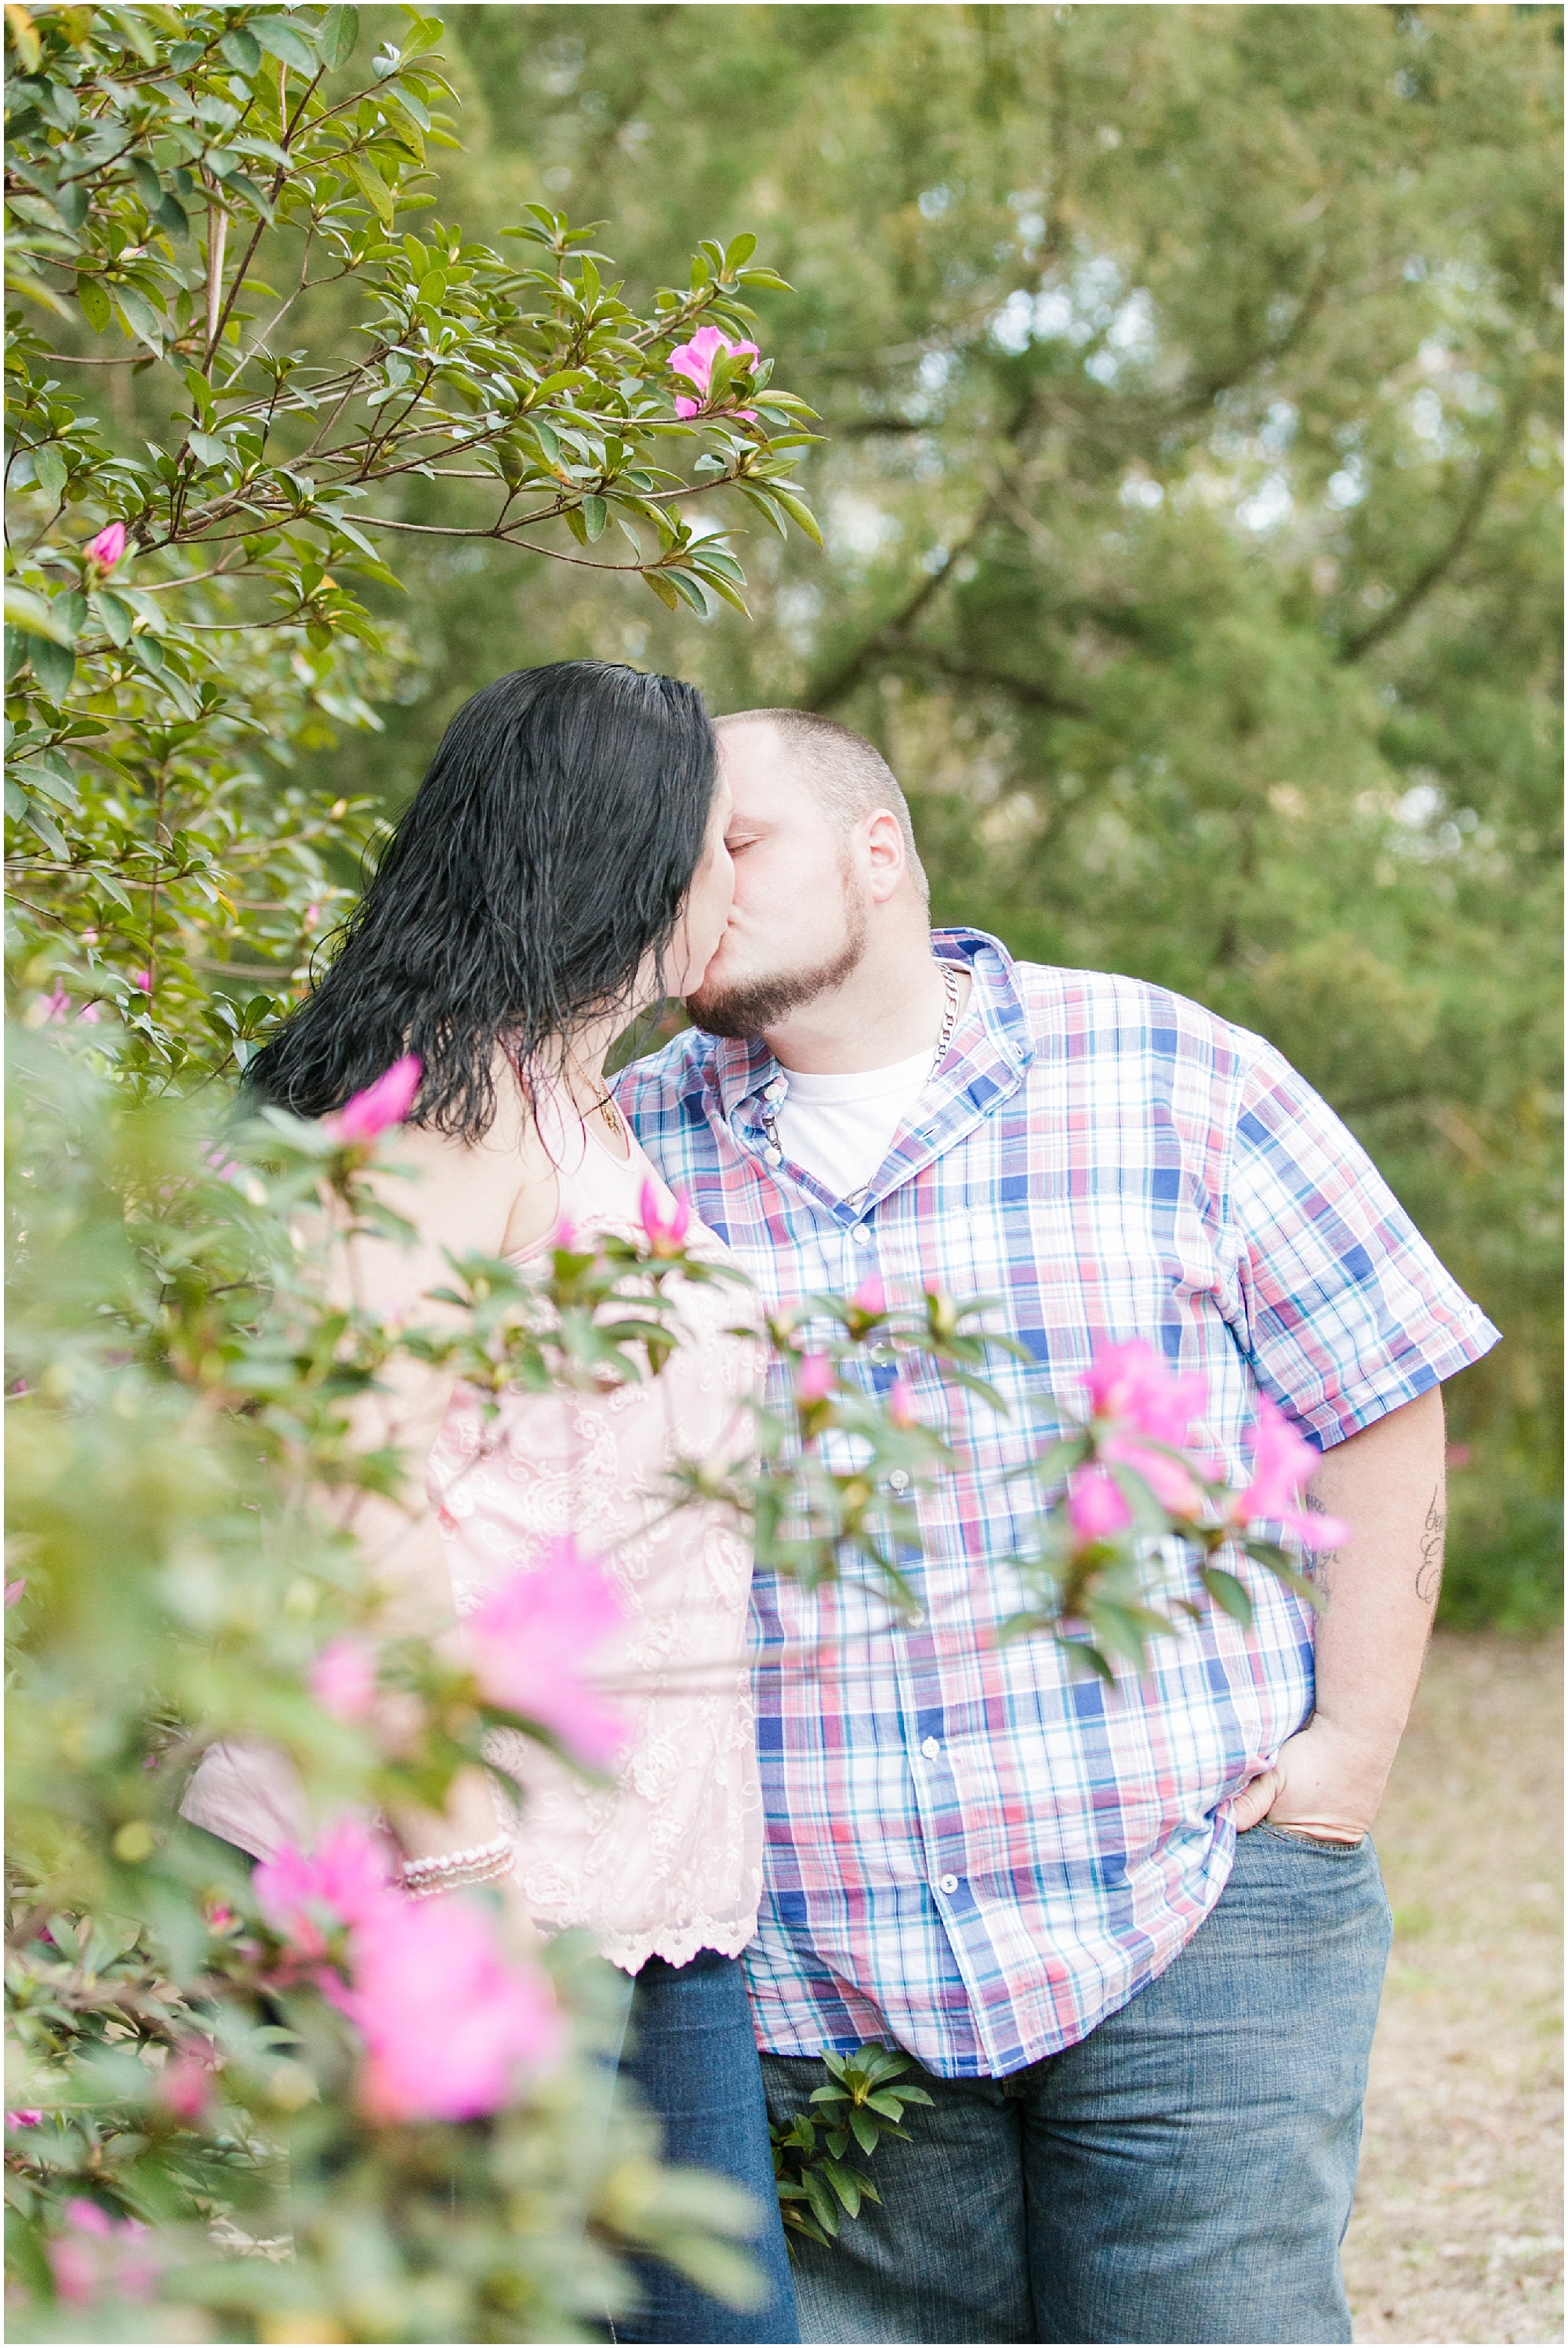 Couple share a kiss while standing near some bushes with light pink flowers.